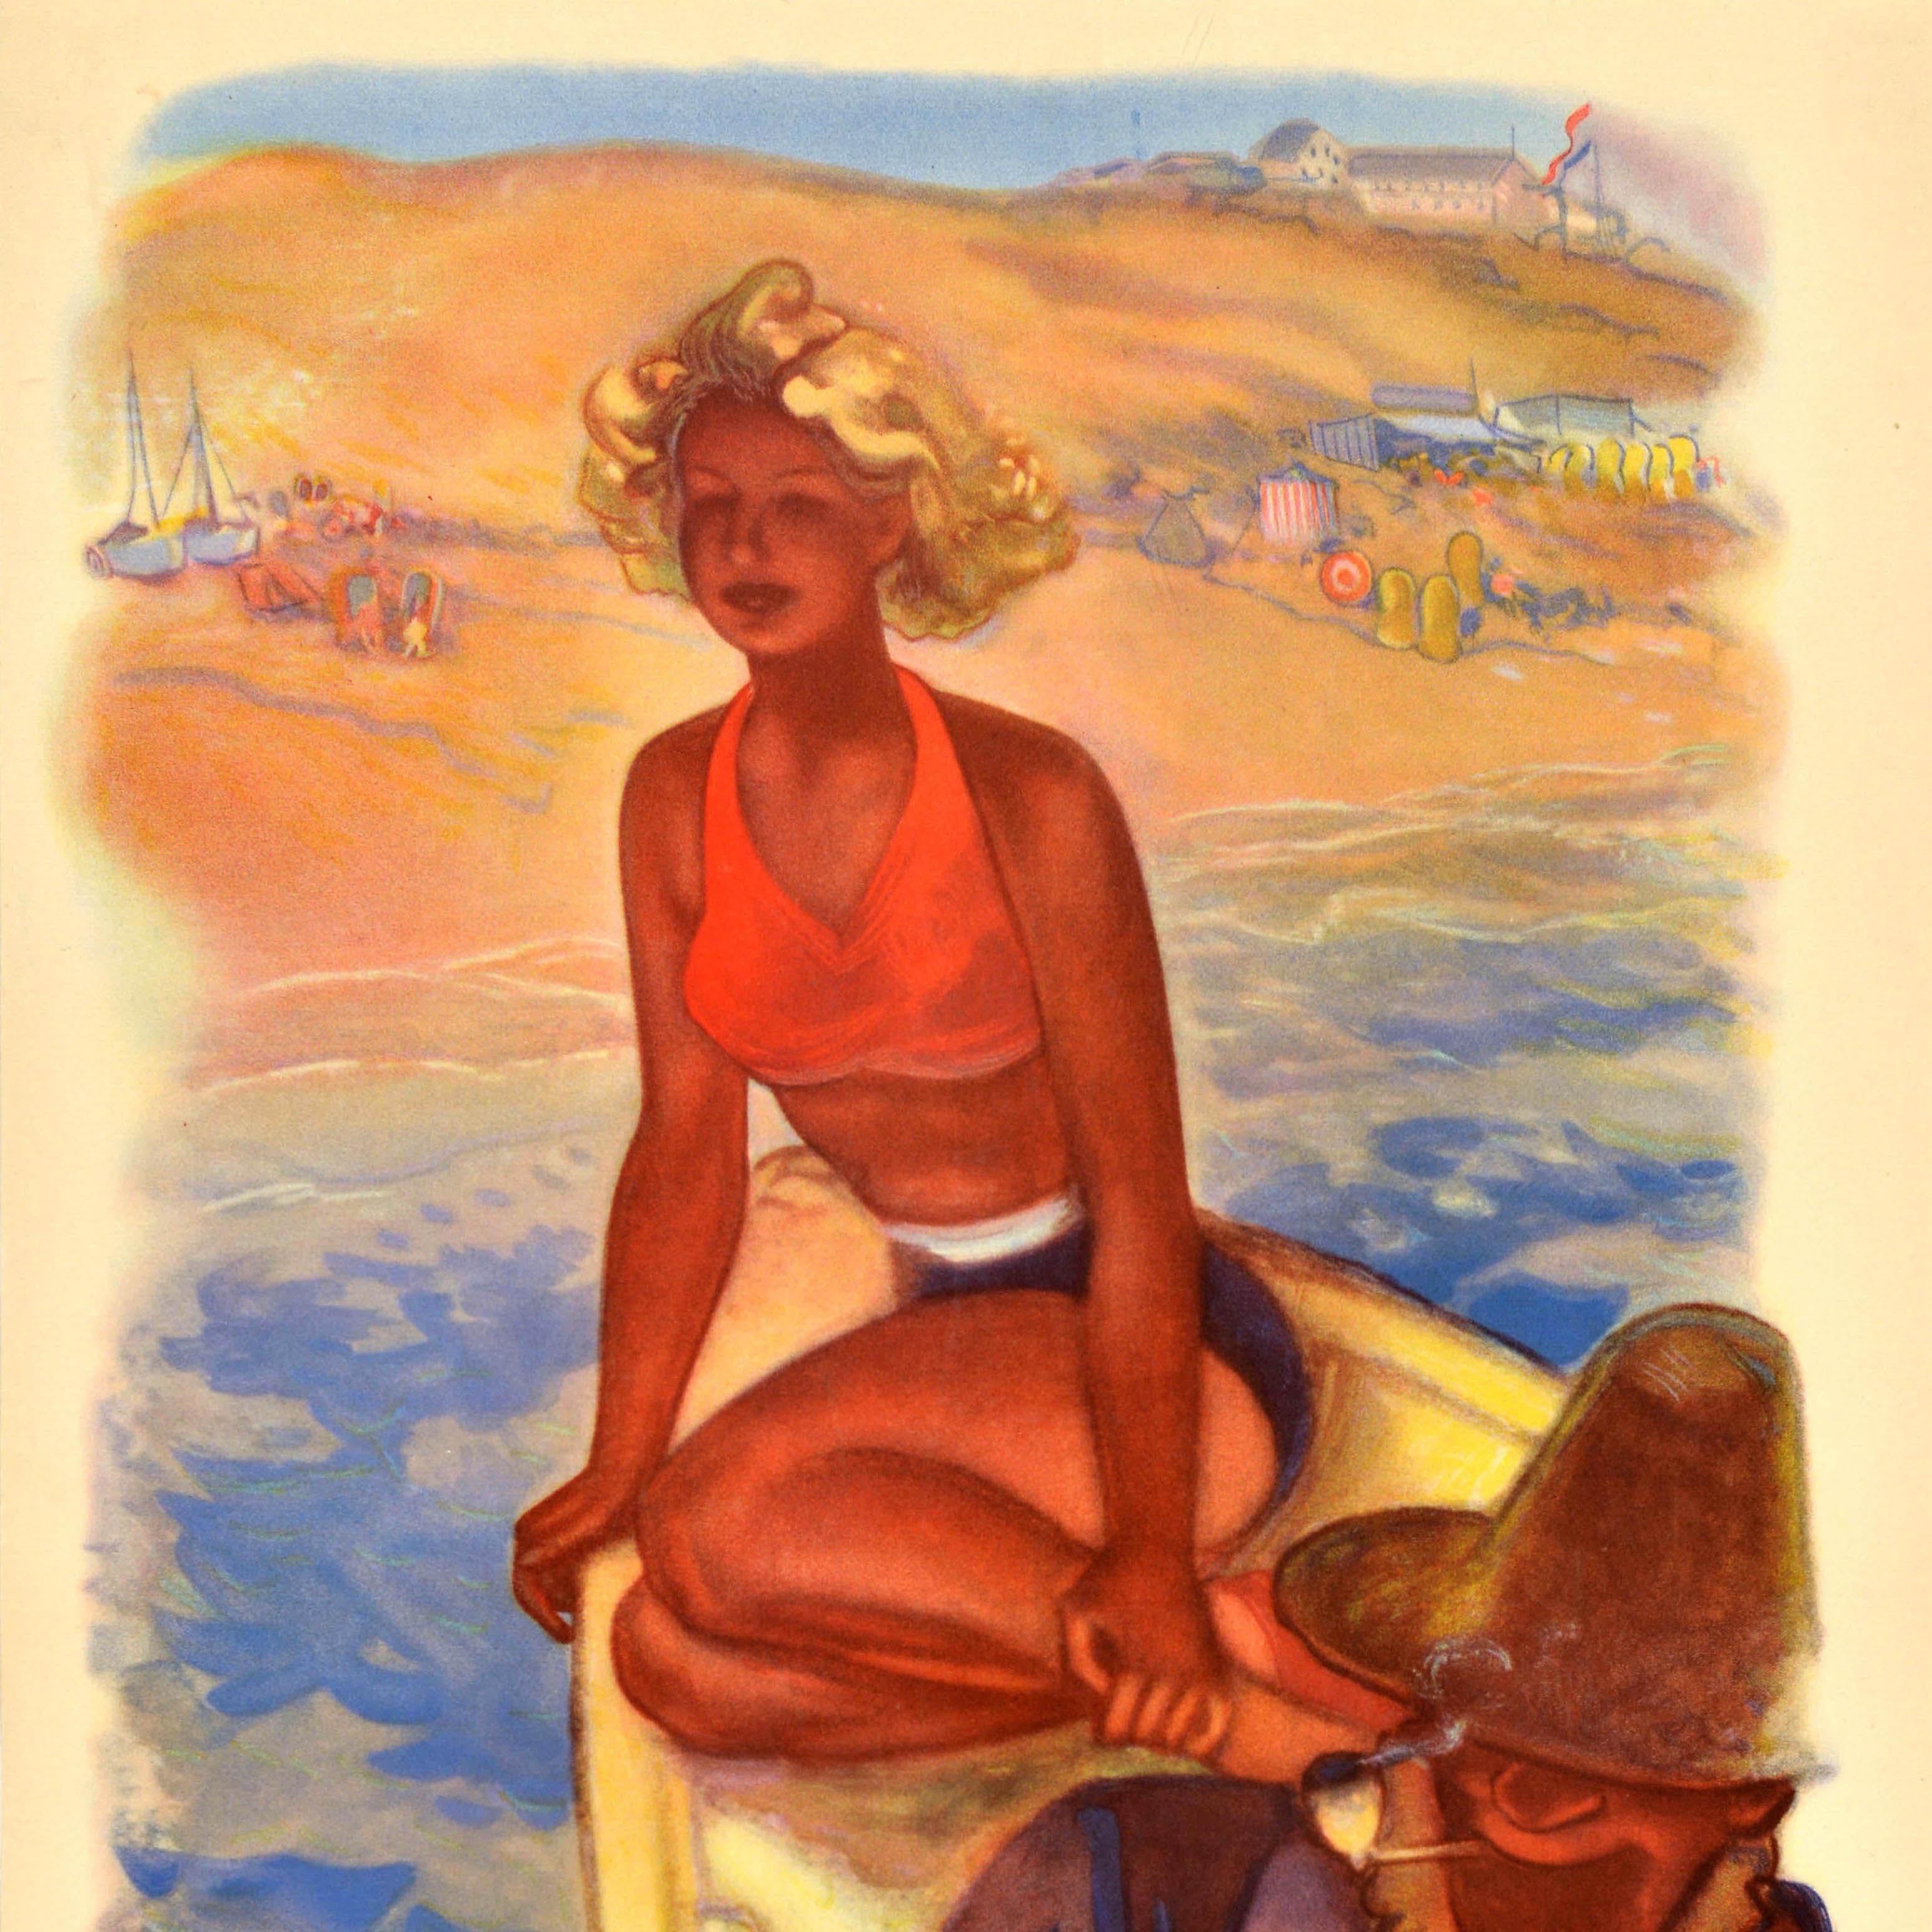 Original vintage travel poster for Holland featuring a lady in a bikini sitting on a wooden rowing boat being rowed by a pipe smoking sailor or fisherman in front of people on the beach in the background. Lithographed by Smeets & Schippers,